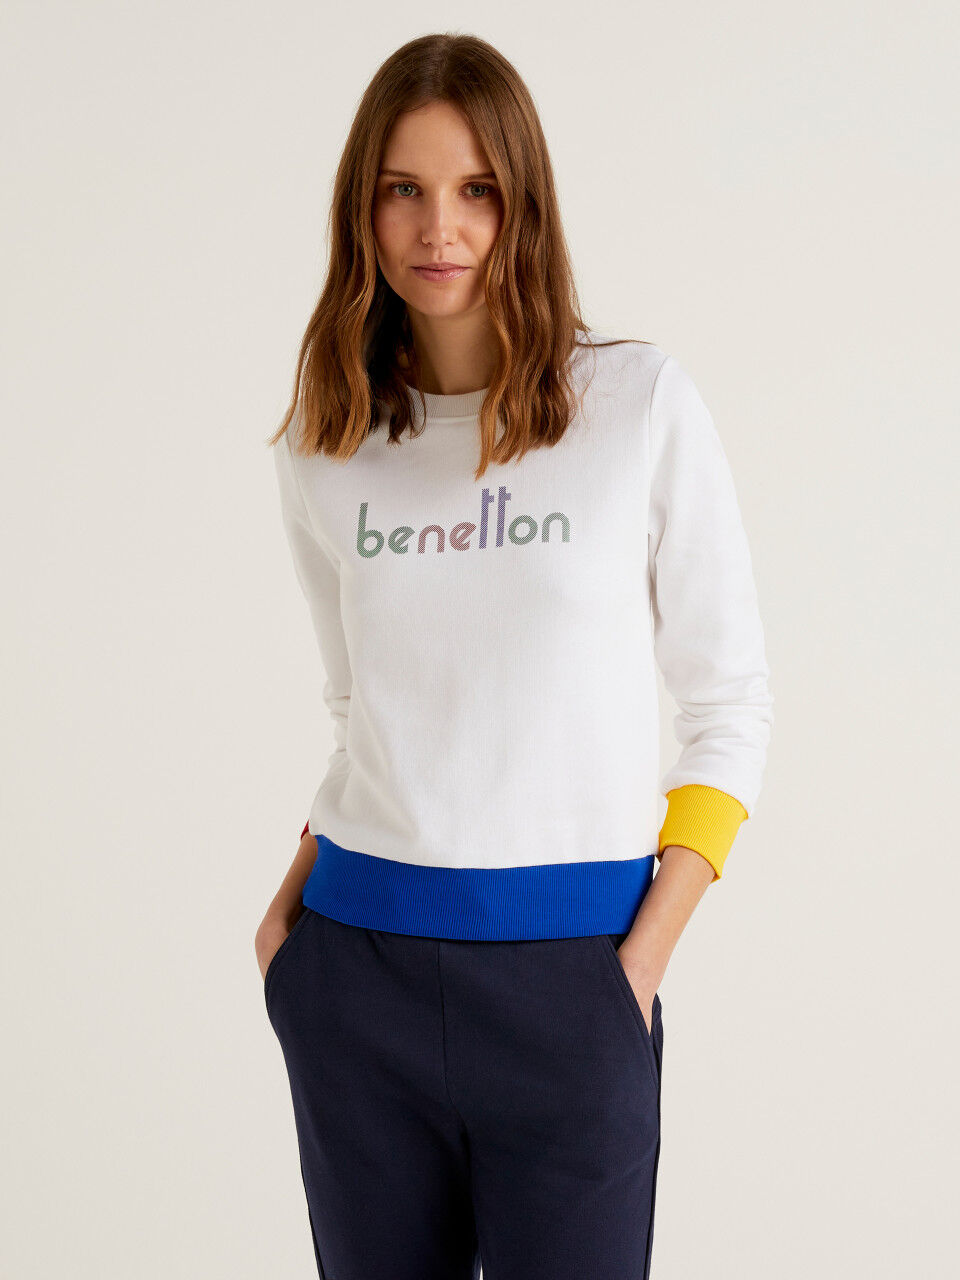 Benetton United Colours Of Benetton Smiley World Glittery Top Chest 60 cms. 